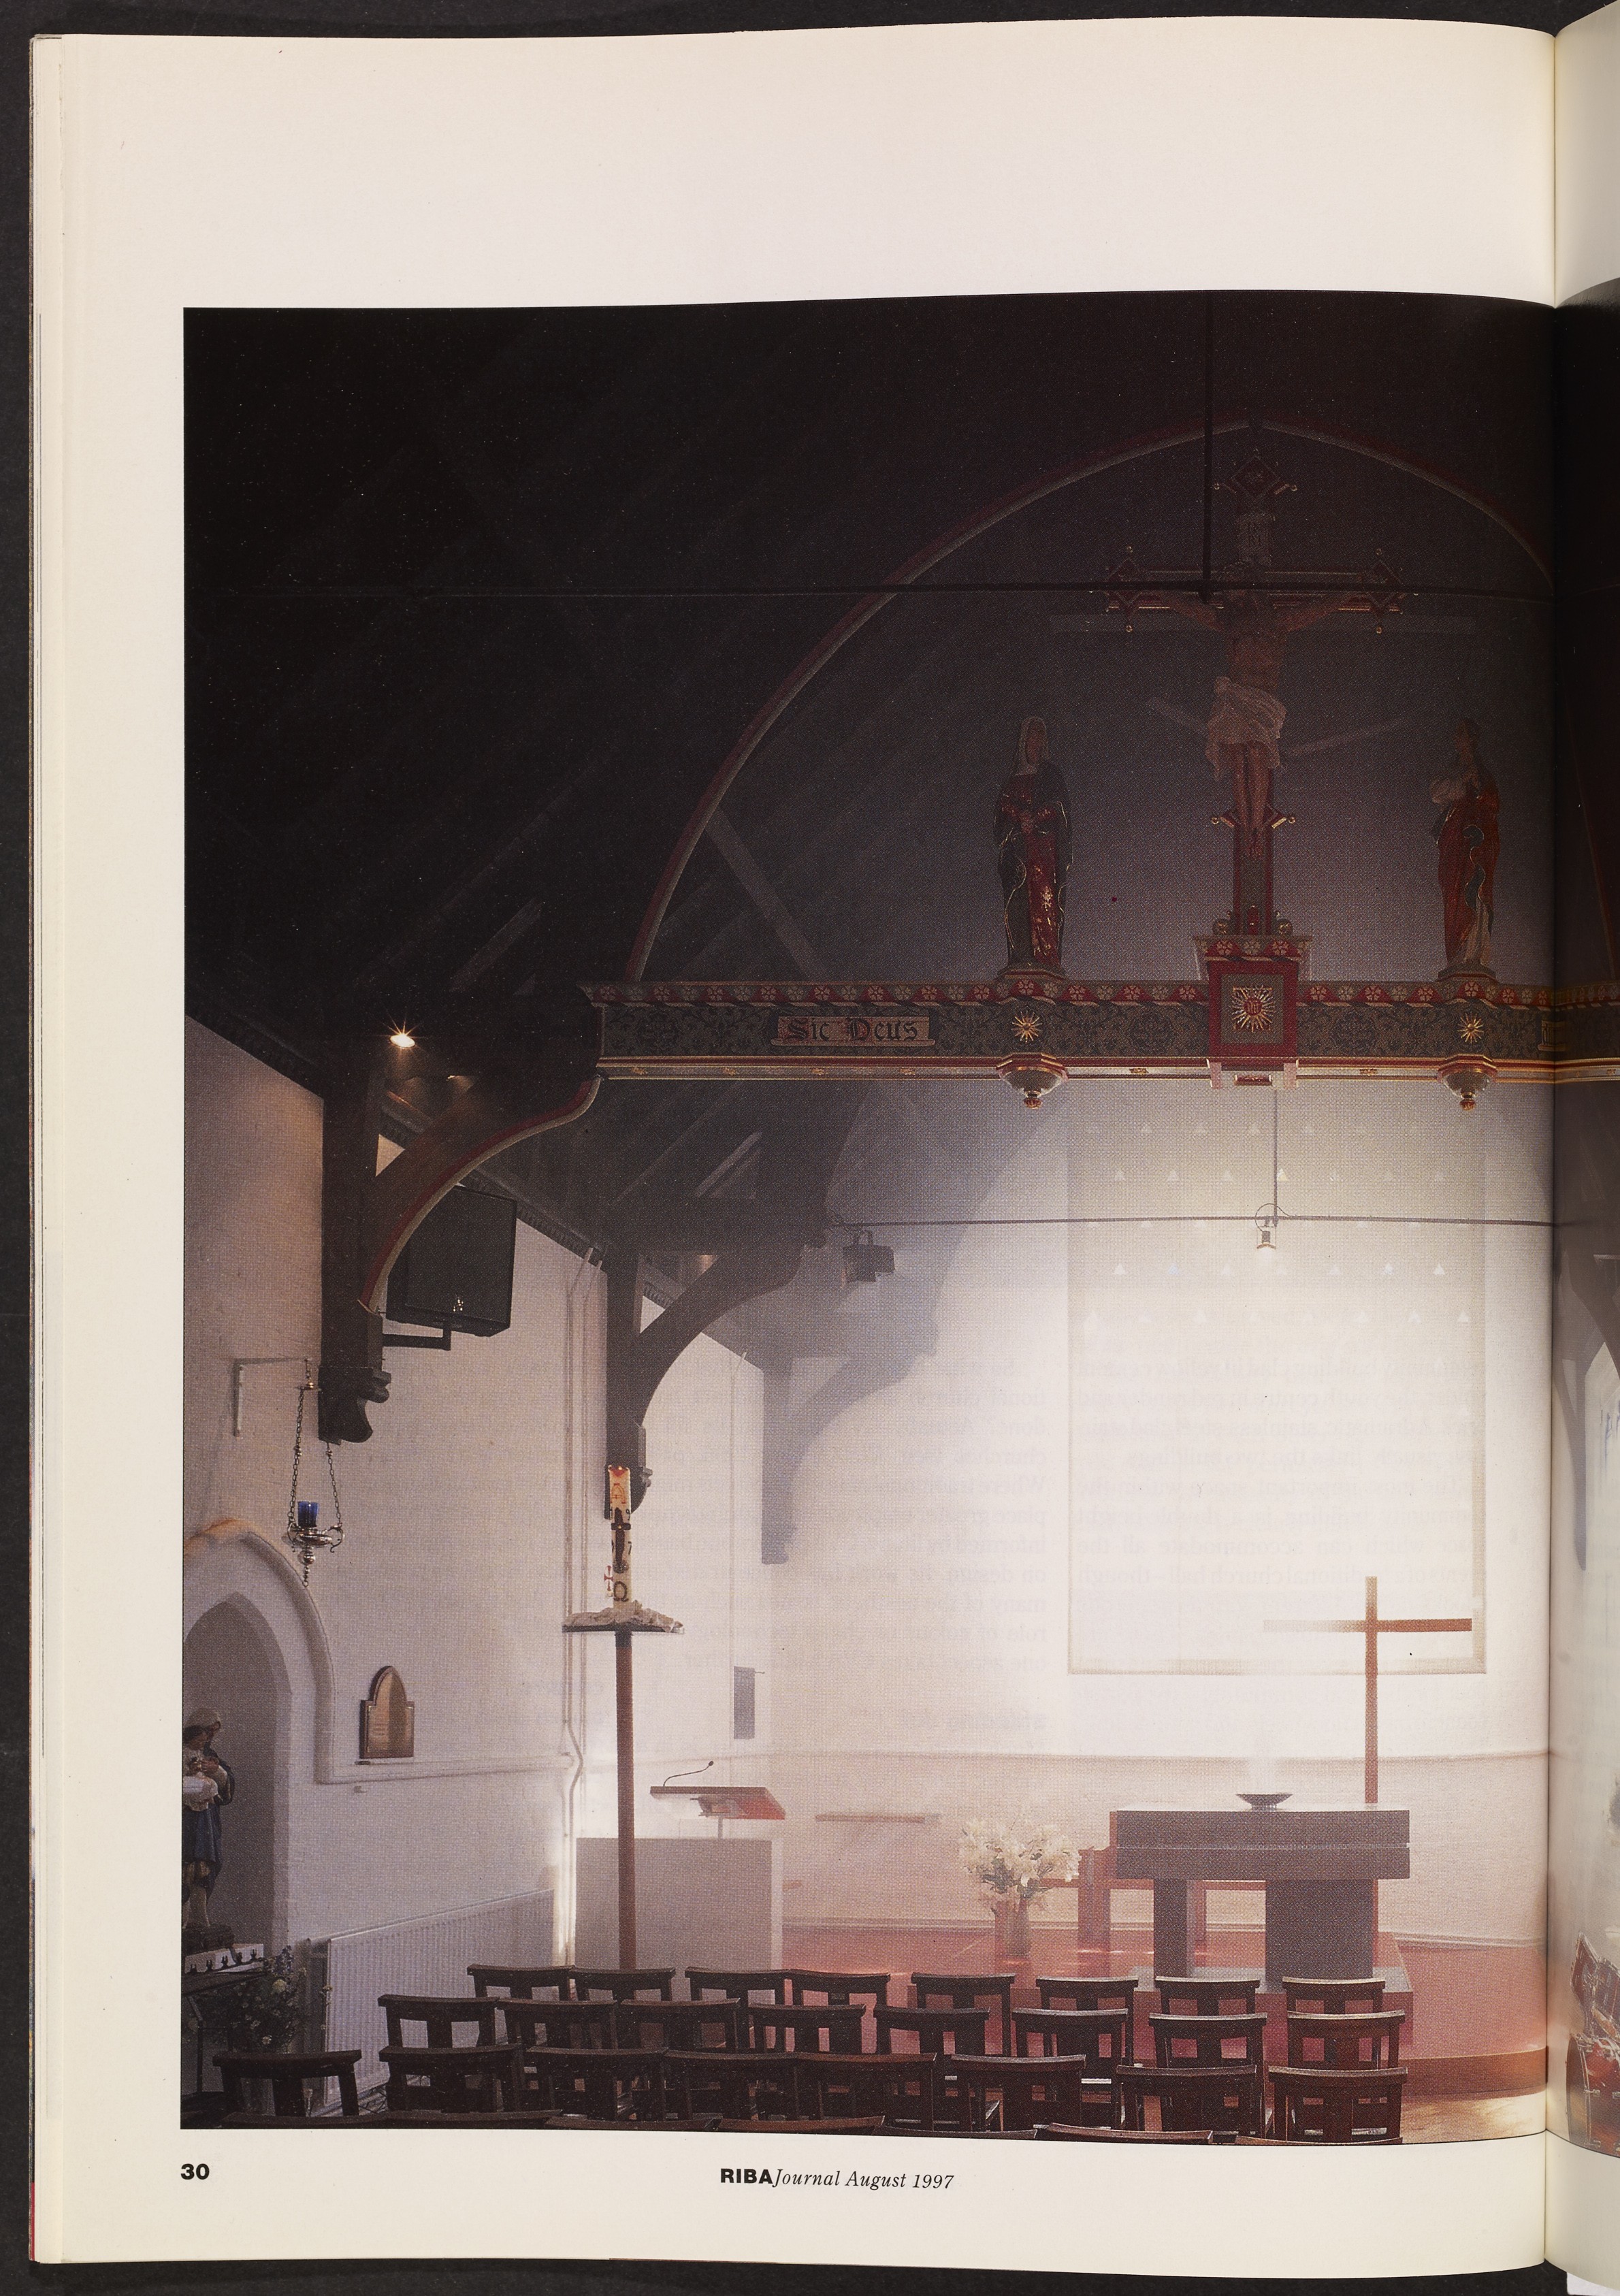 St Martin’s Church by Cottrell and Vermeulen Architects was featured in the RIBA Journal in 1997